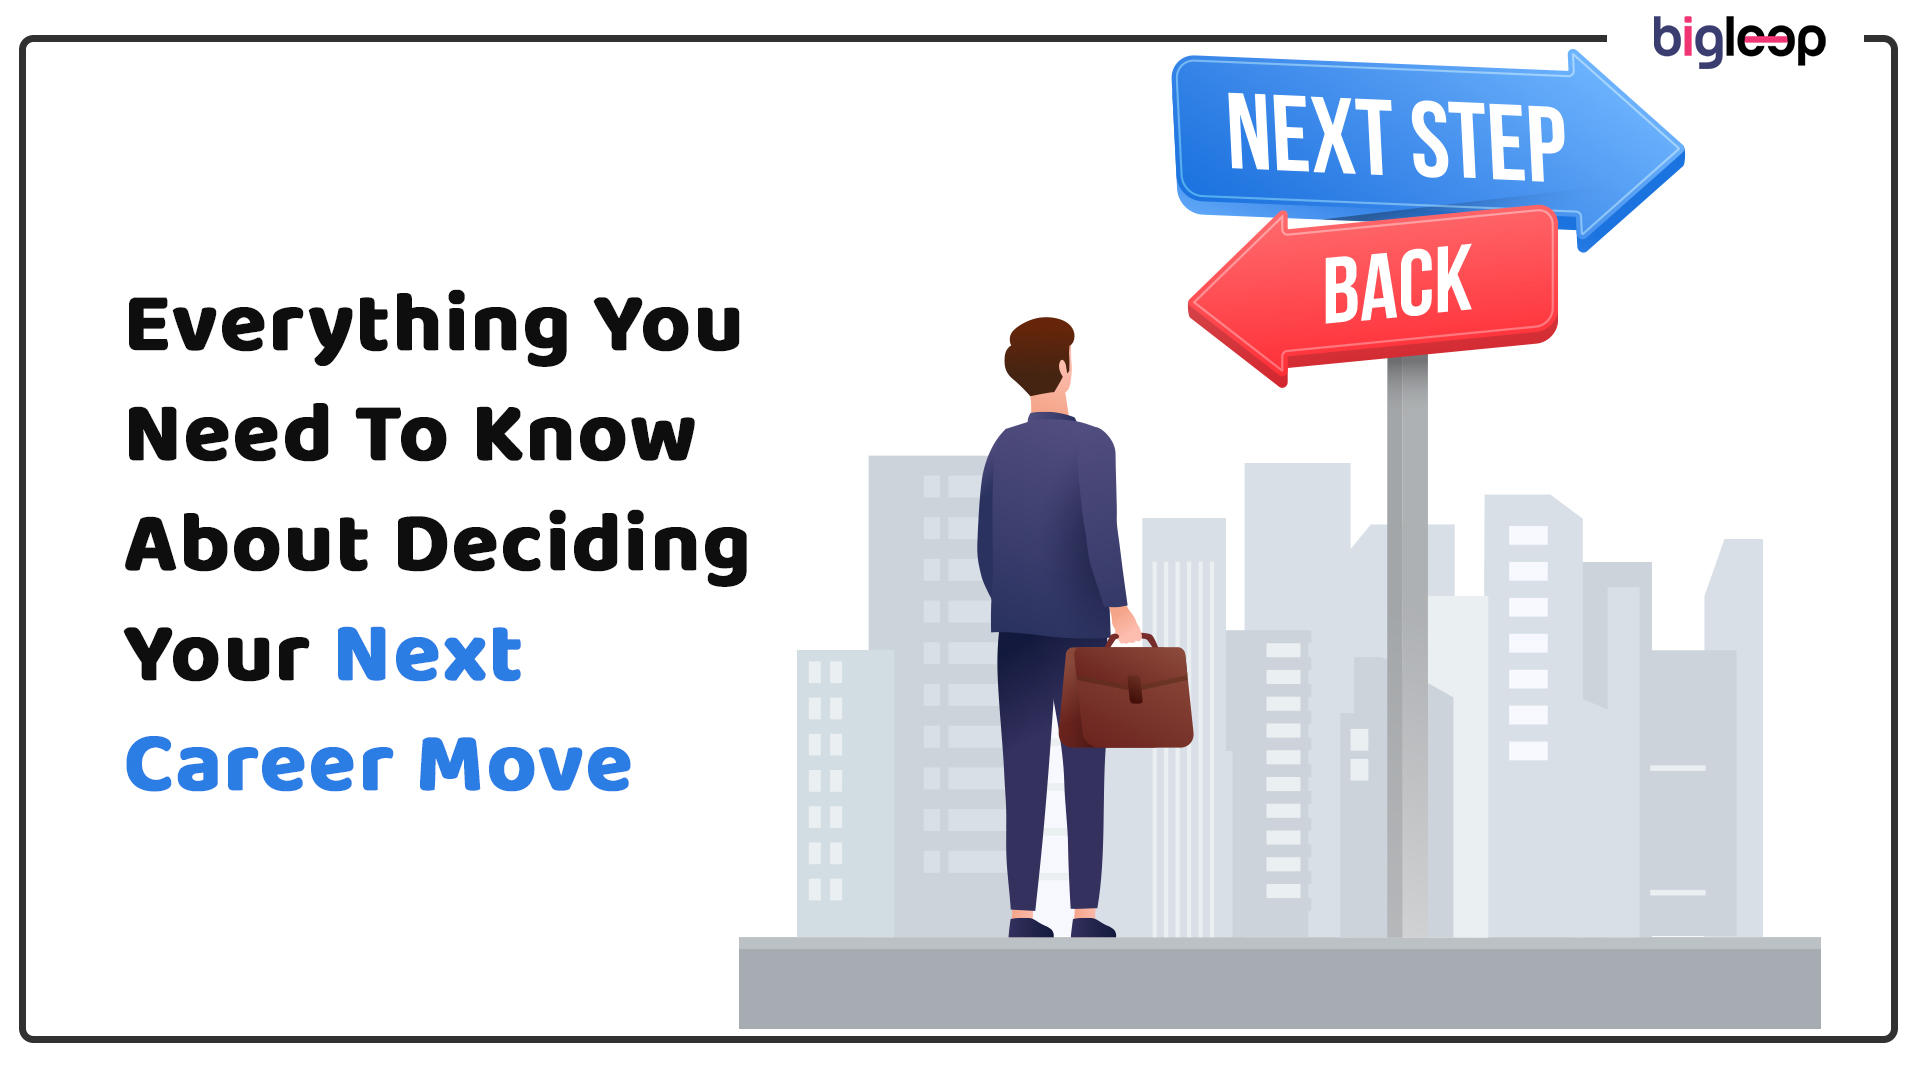 Everything You Need To Know About Deciding Your Next Career Move